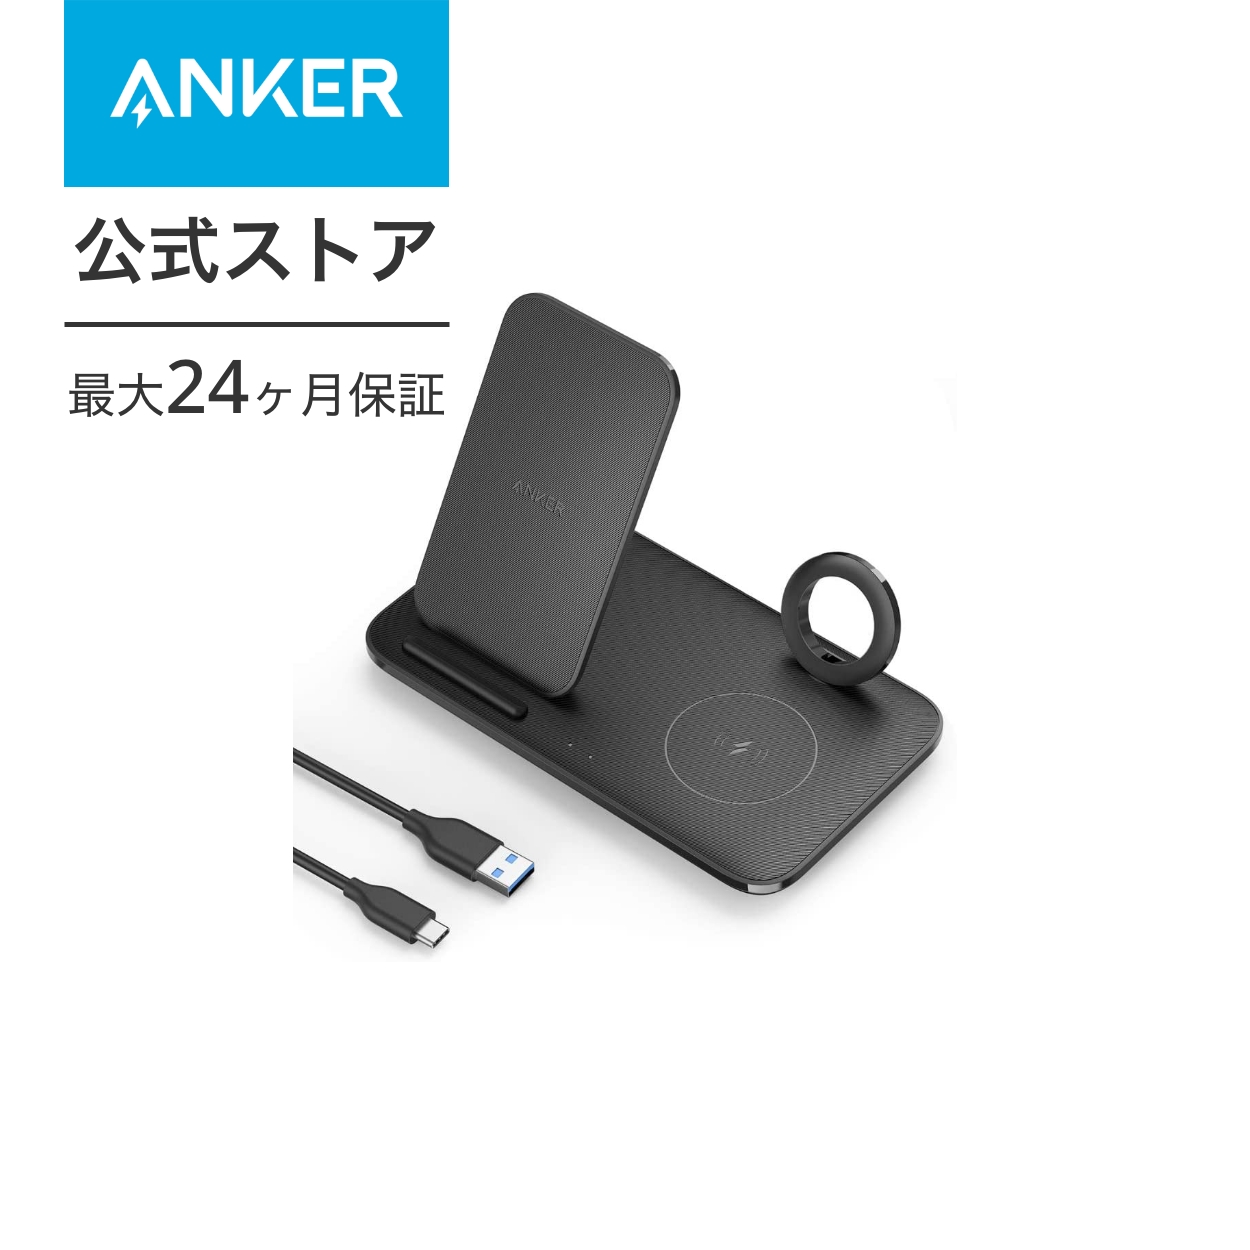 Anker PowerWave  3-in-1 stand with Watch Holder ワイヤレス充電器 Apple Watchホルダー付